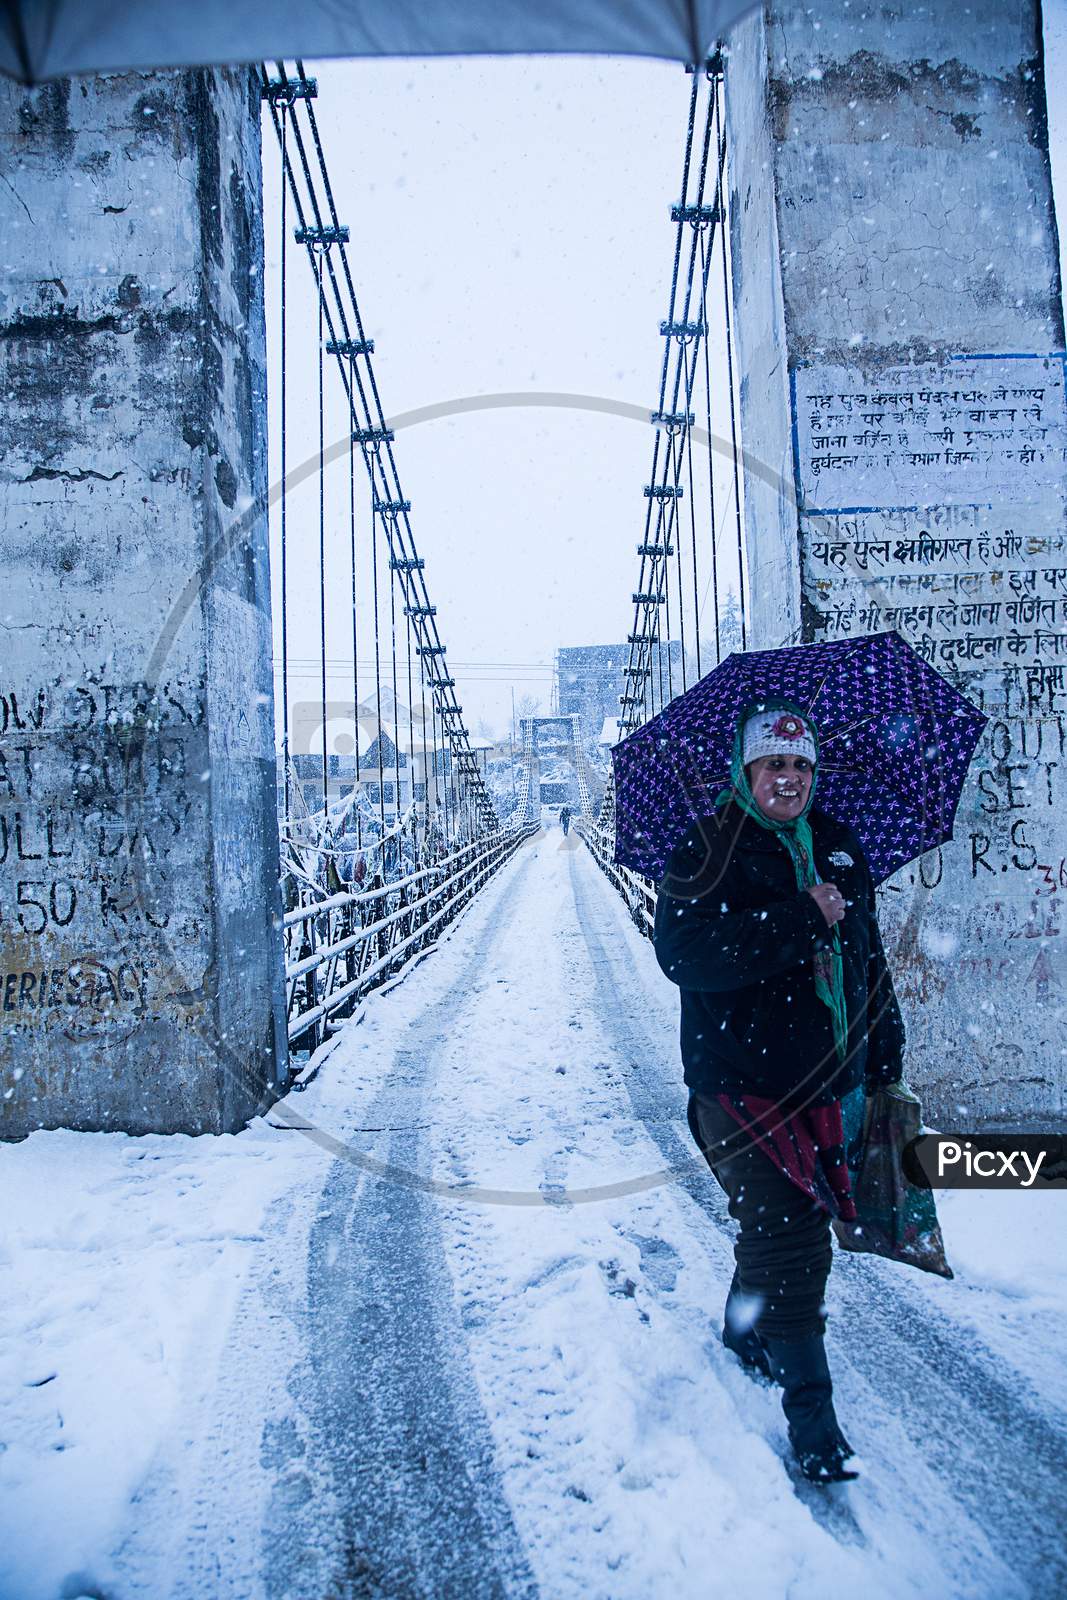 Manali, India - Jan 22, 2019: Heavy Winter Snow Fall, A Person Walking Alone With Umbrella On The Bridge, Wide Angle Shot - Image